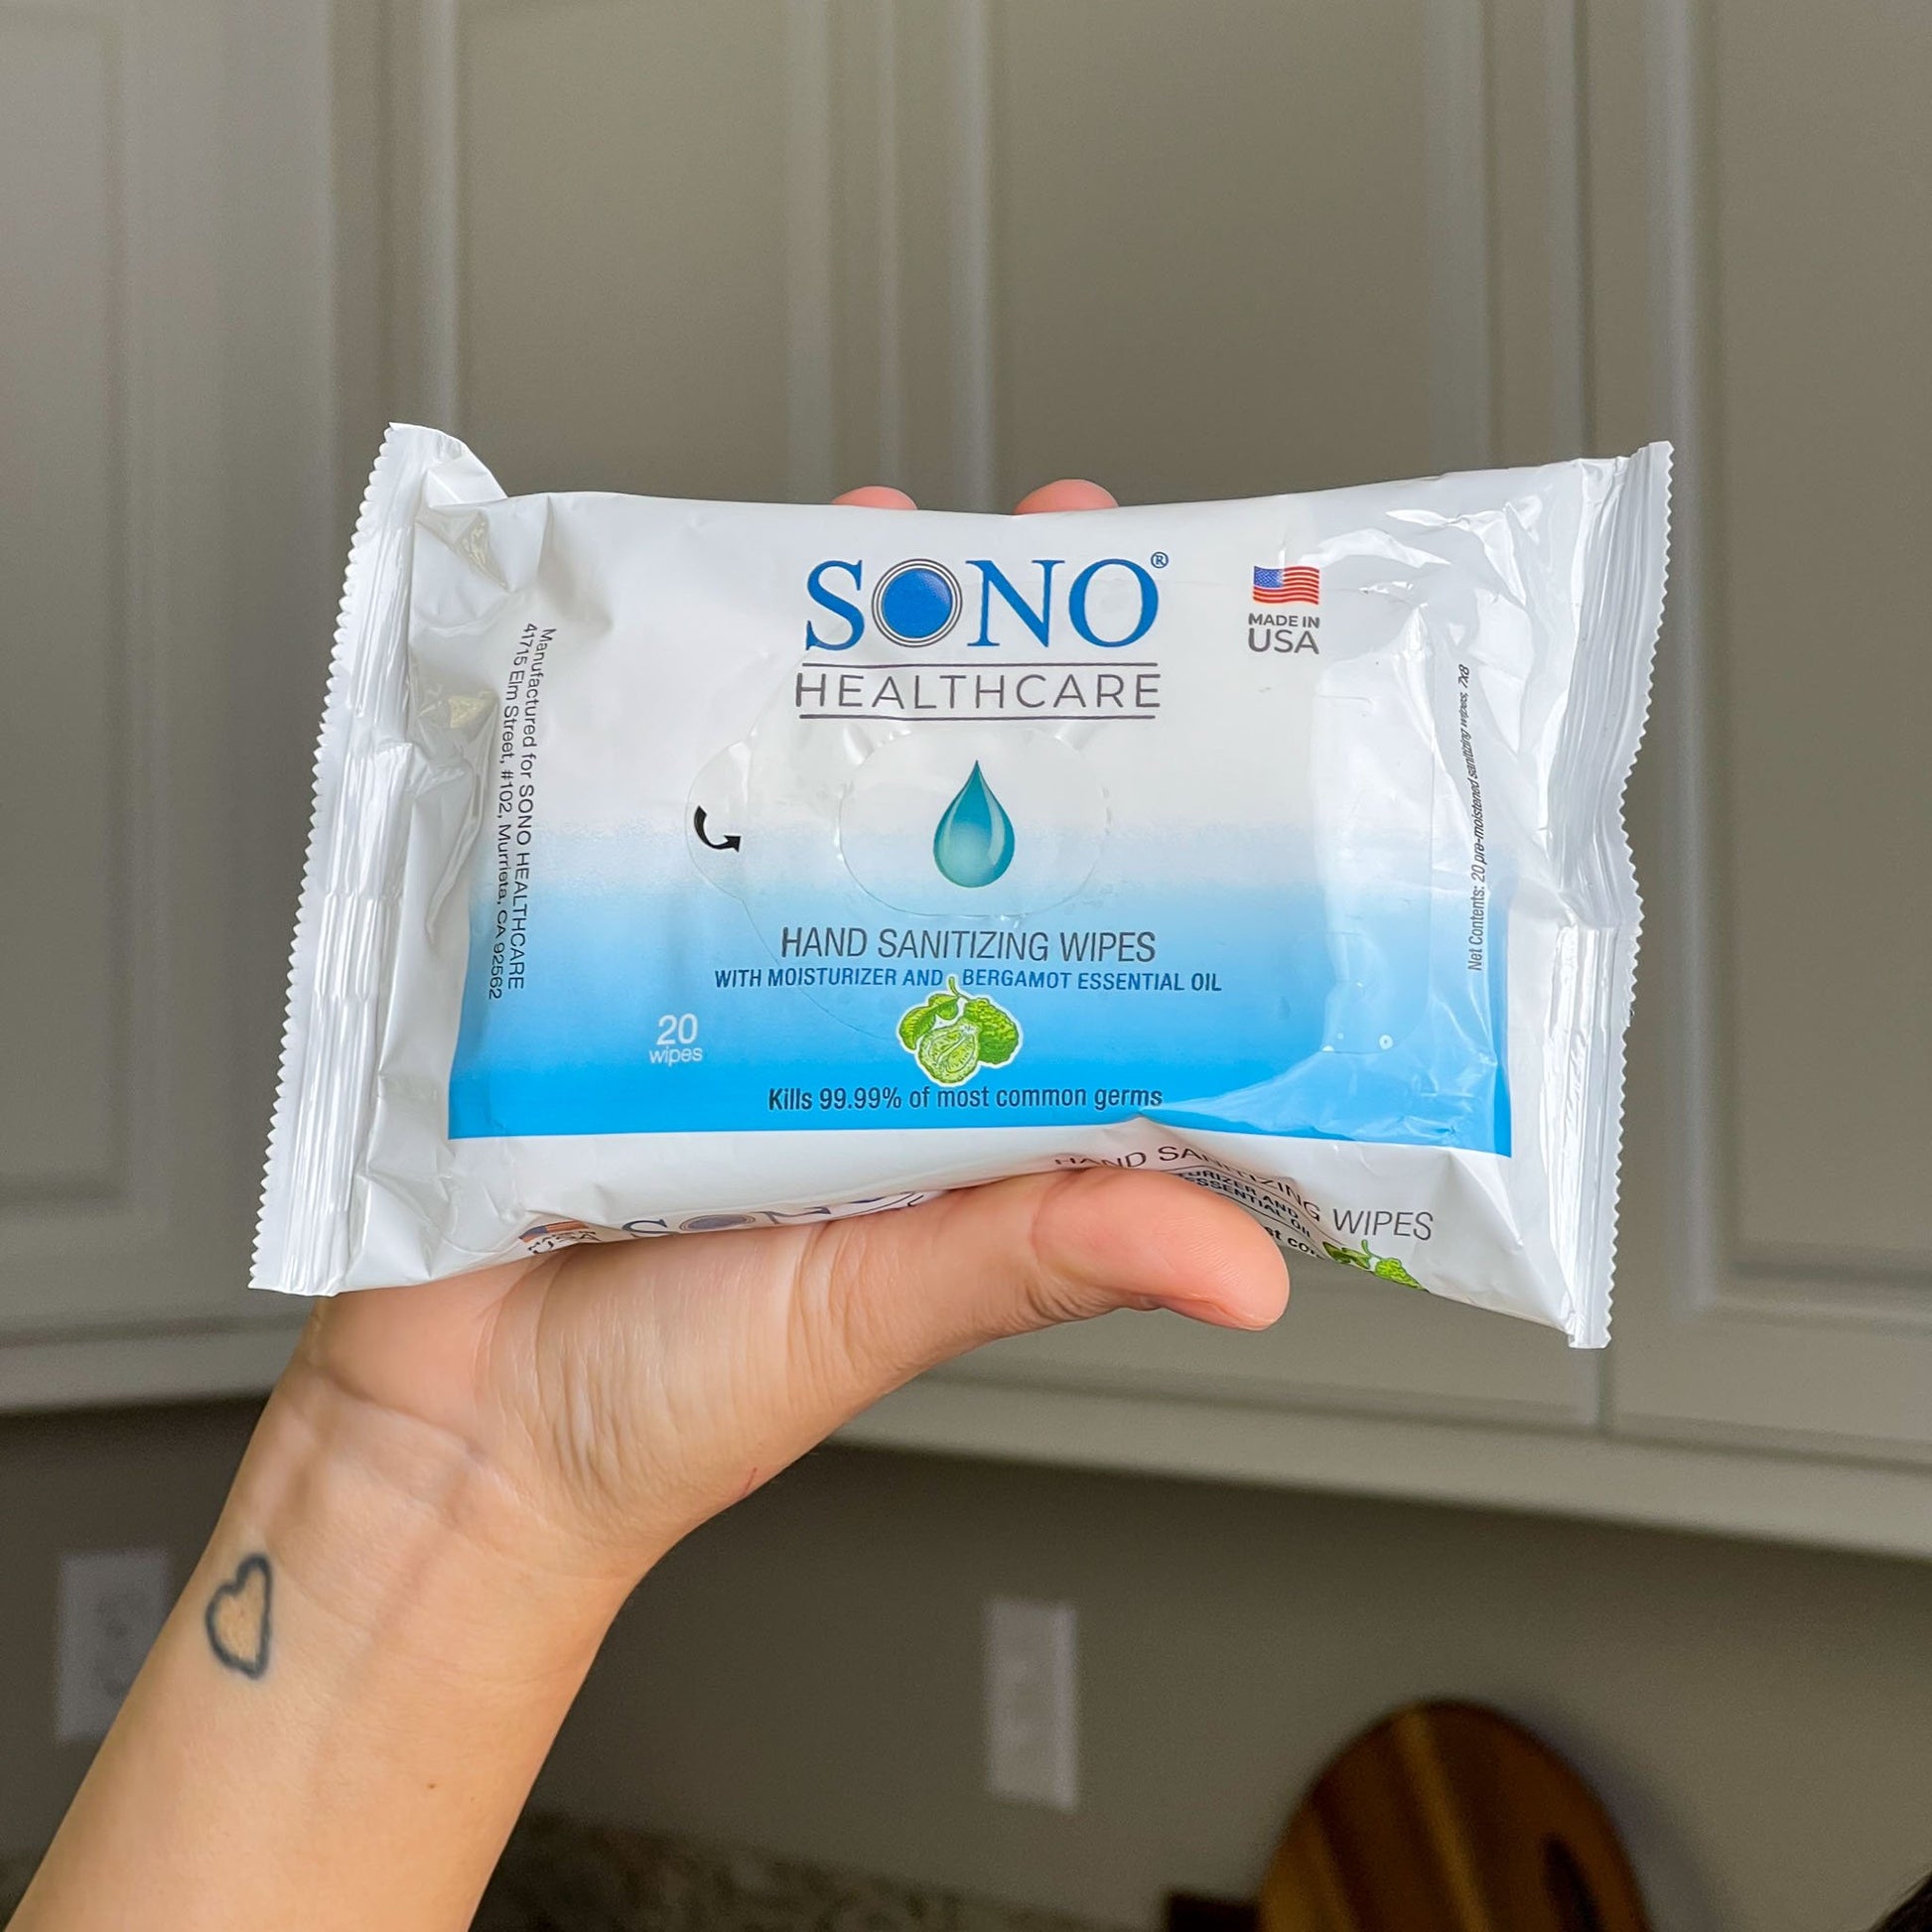 Close-up of SONO Hand Sanitizing Wipes showcasing its size and quality